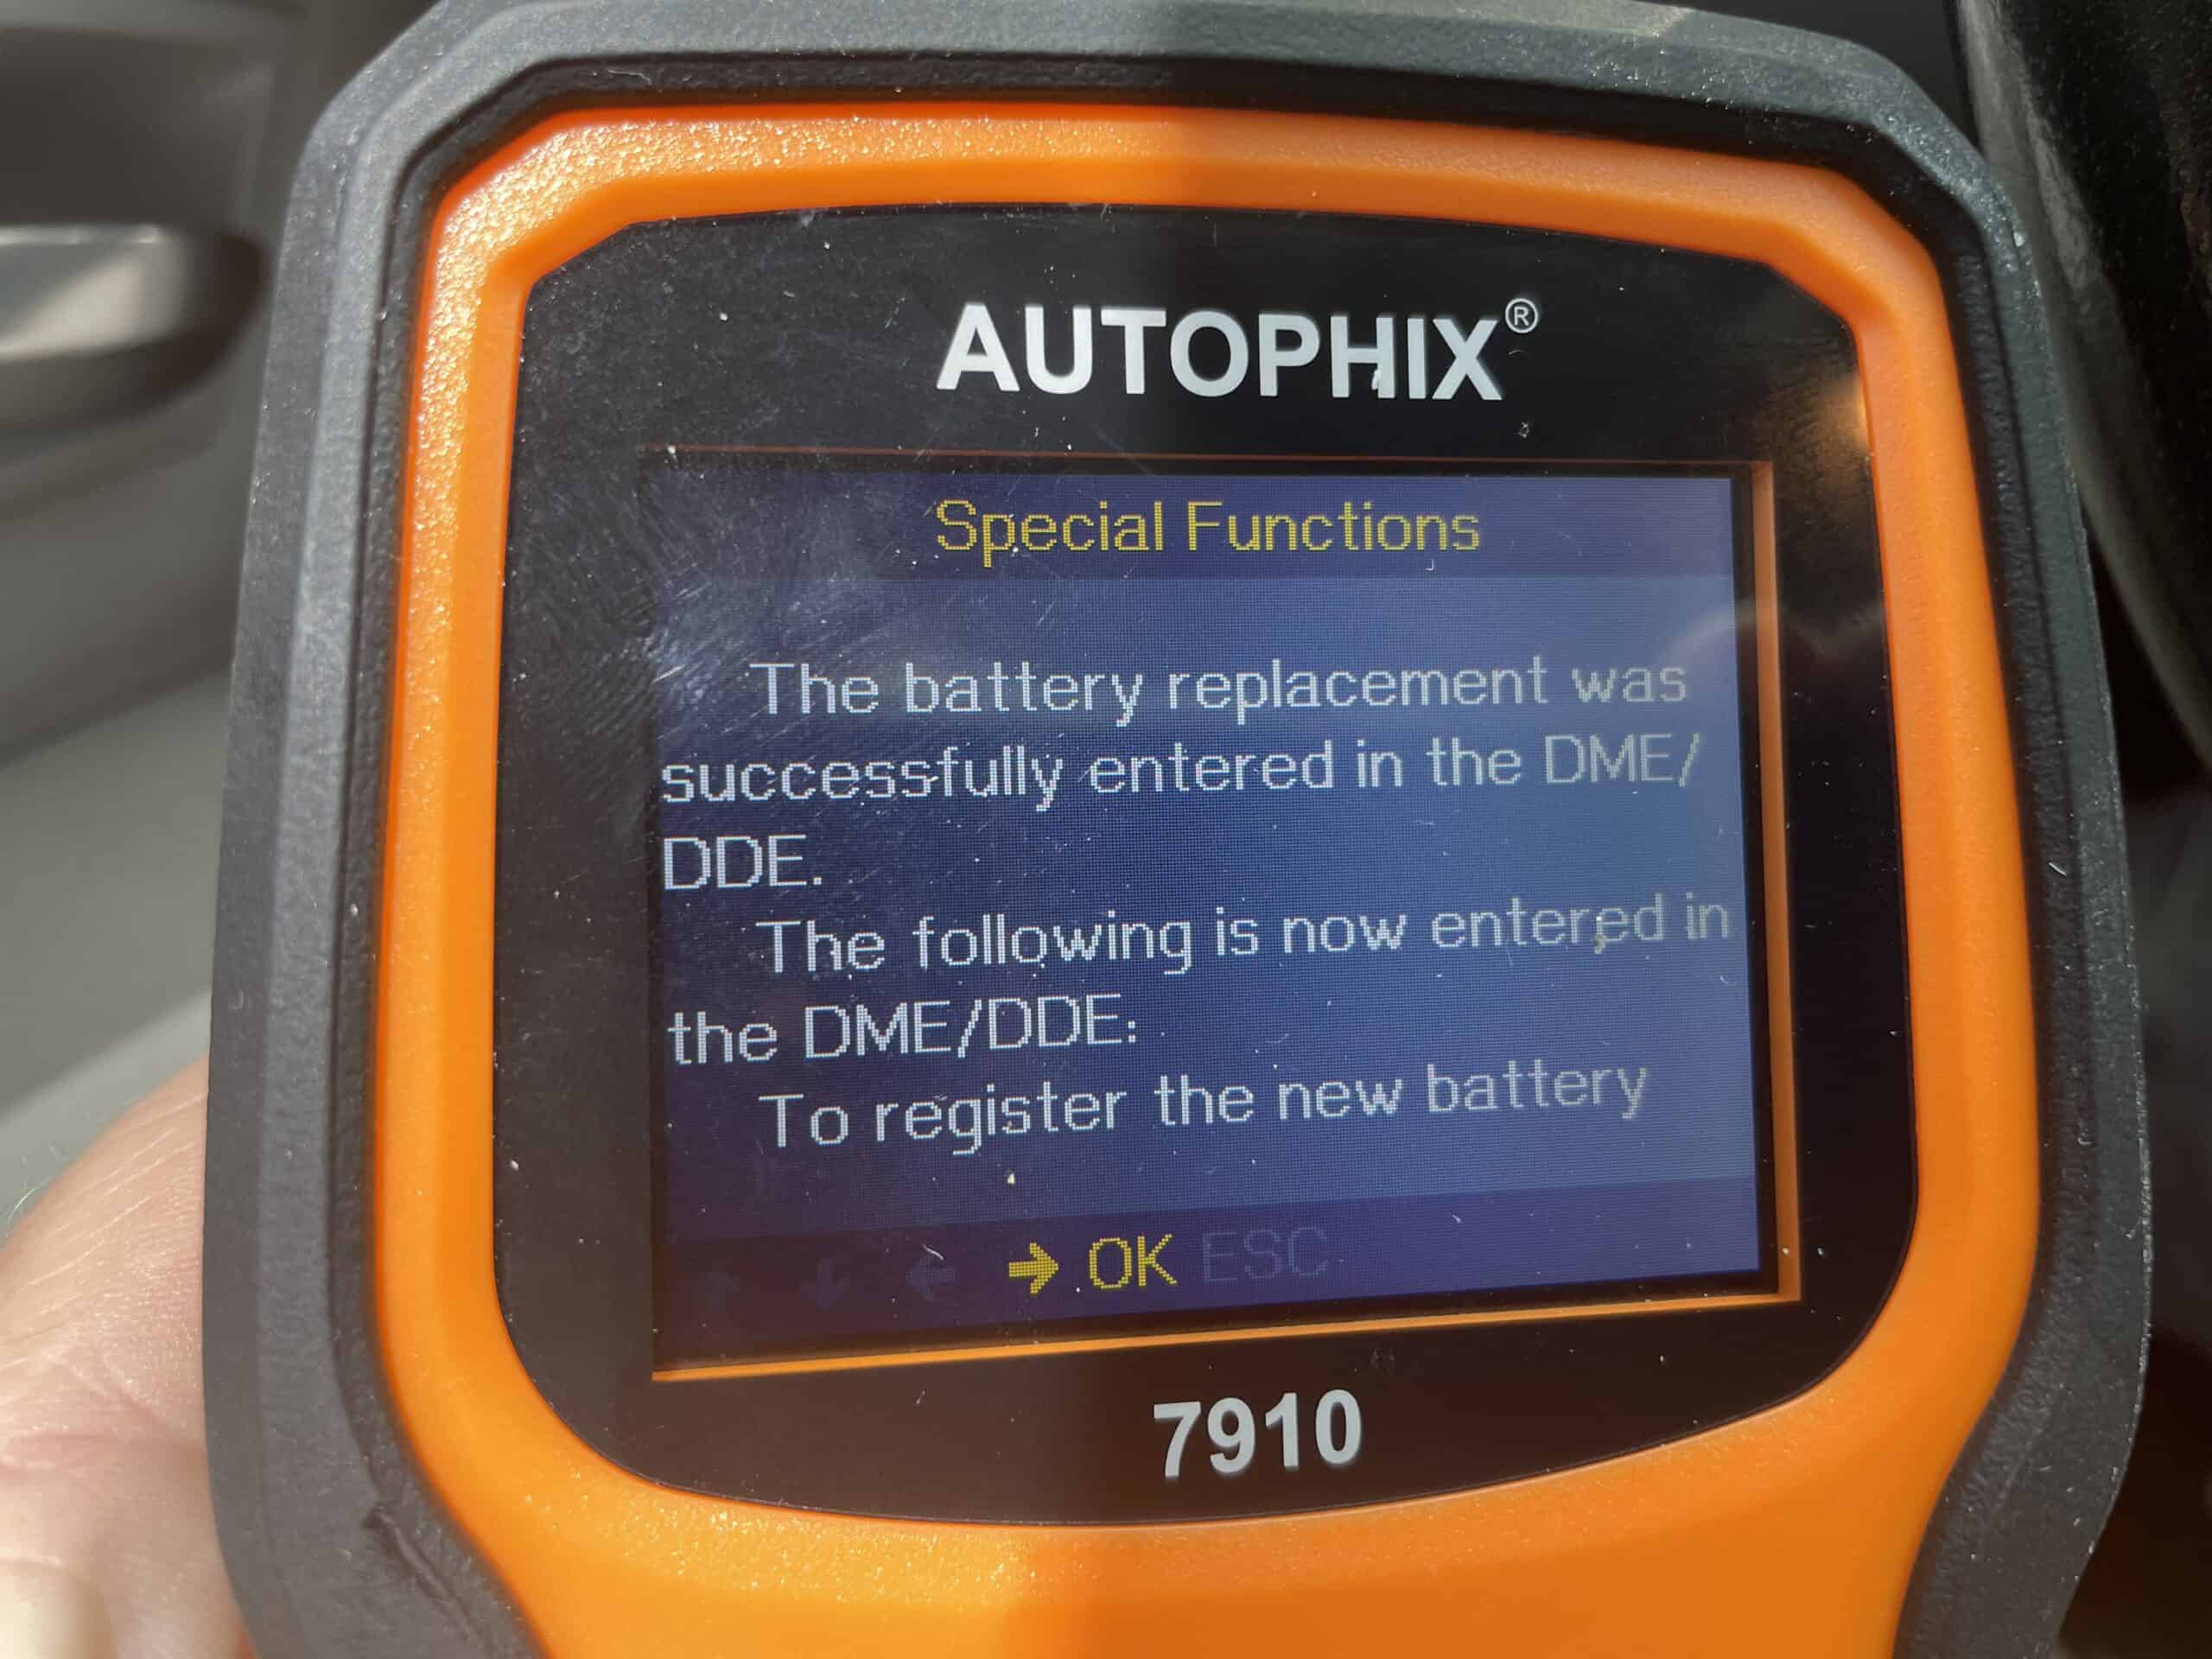 The battery registration has been completed successfully.